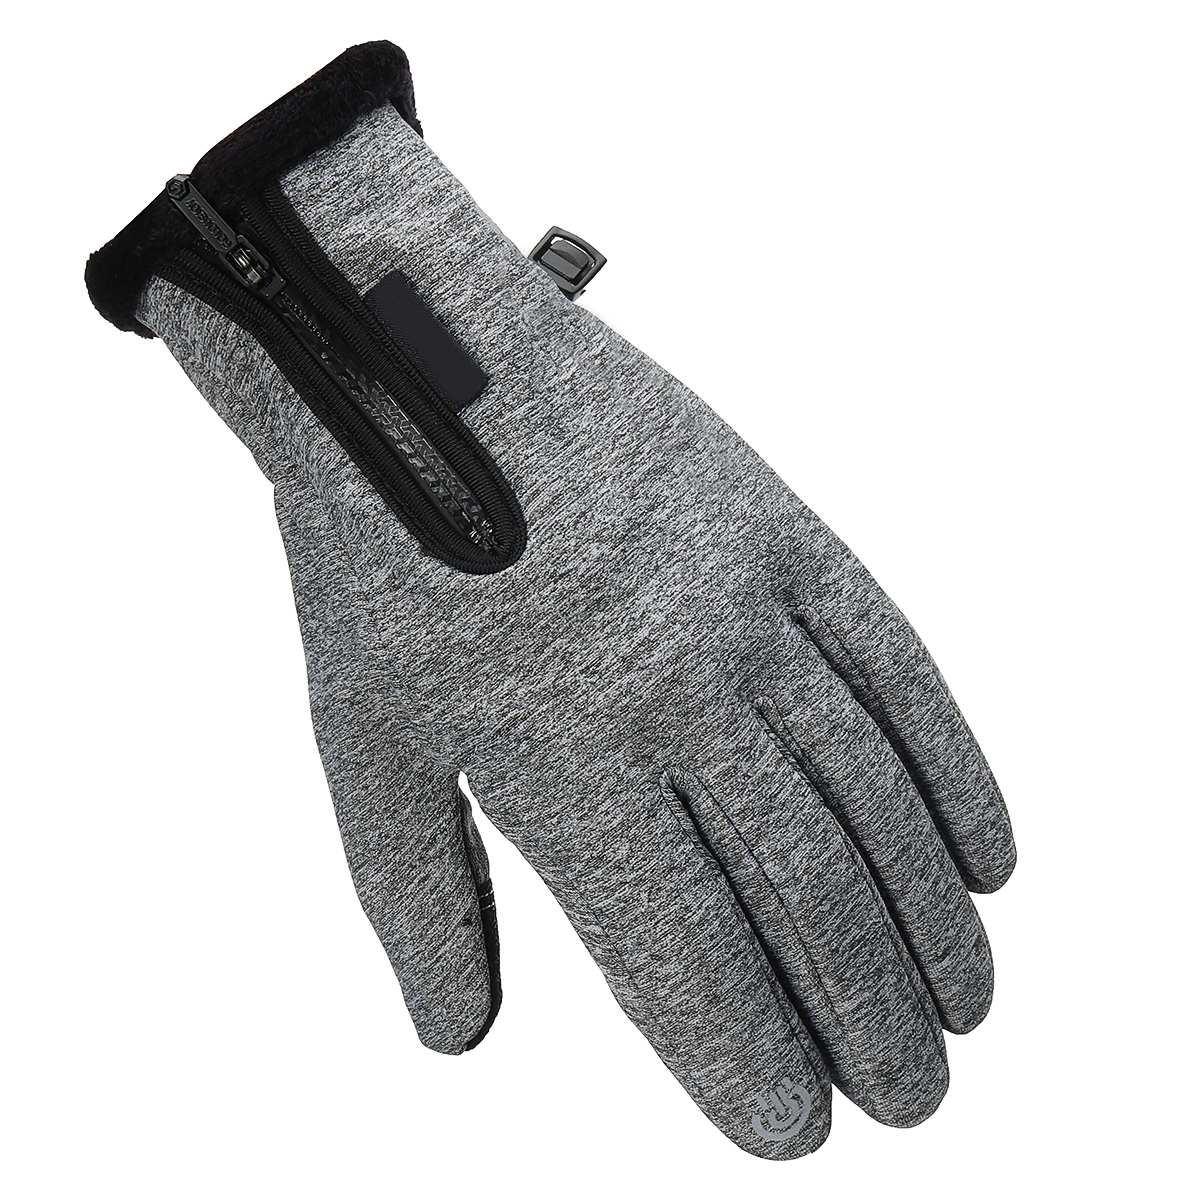 XL-Size-Winter-Warm-Waterproof-Windproof-Anti-Slip-Touch-Screen-Outdoors-Motorcycle-Riding-Gloves-1856137-7